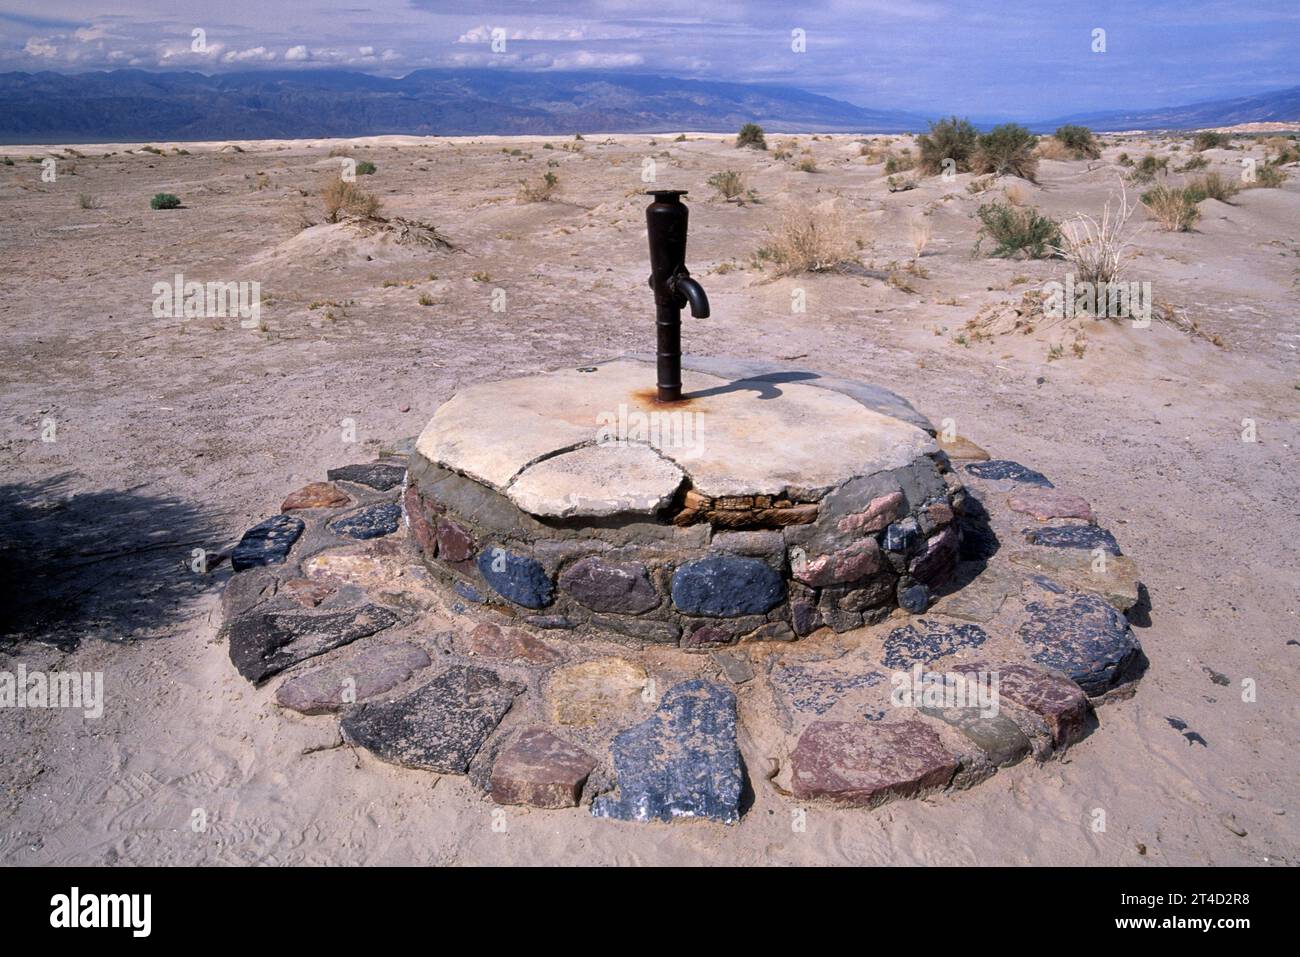 Stovepipe Wells, Death Valley National Park, Californie Banque D'Images